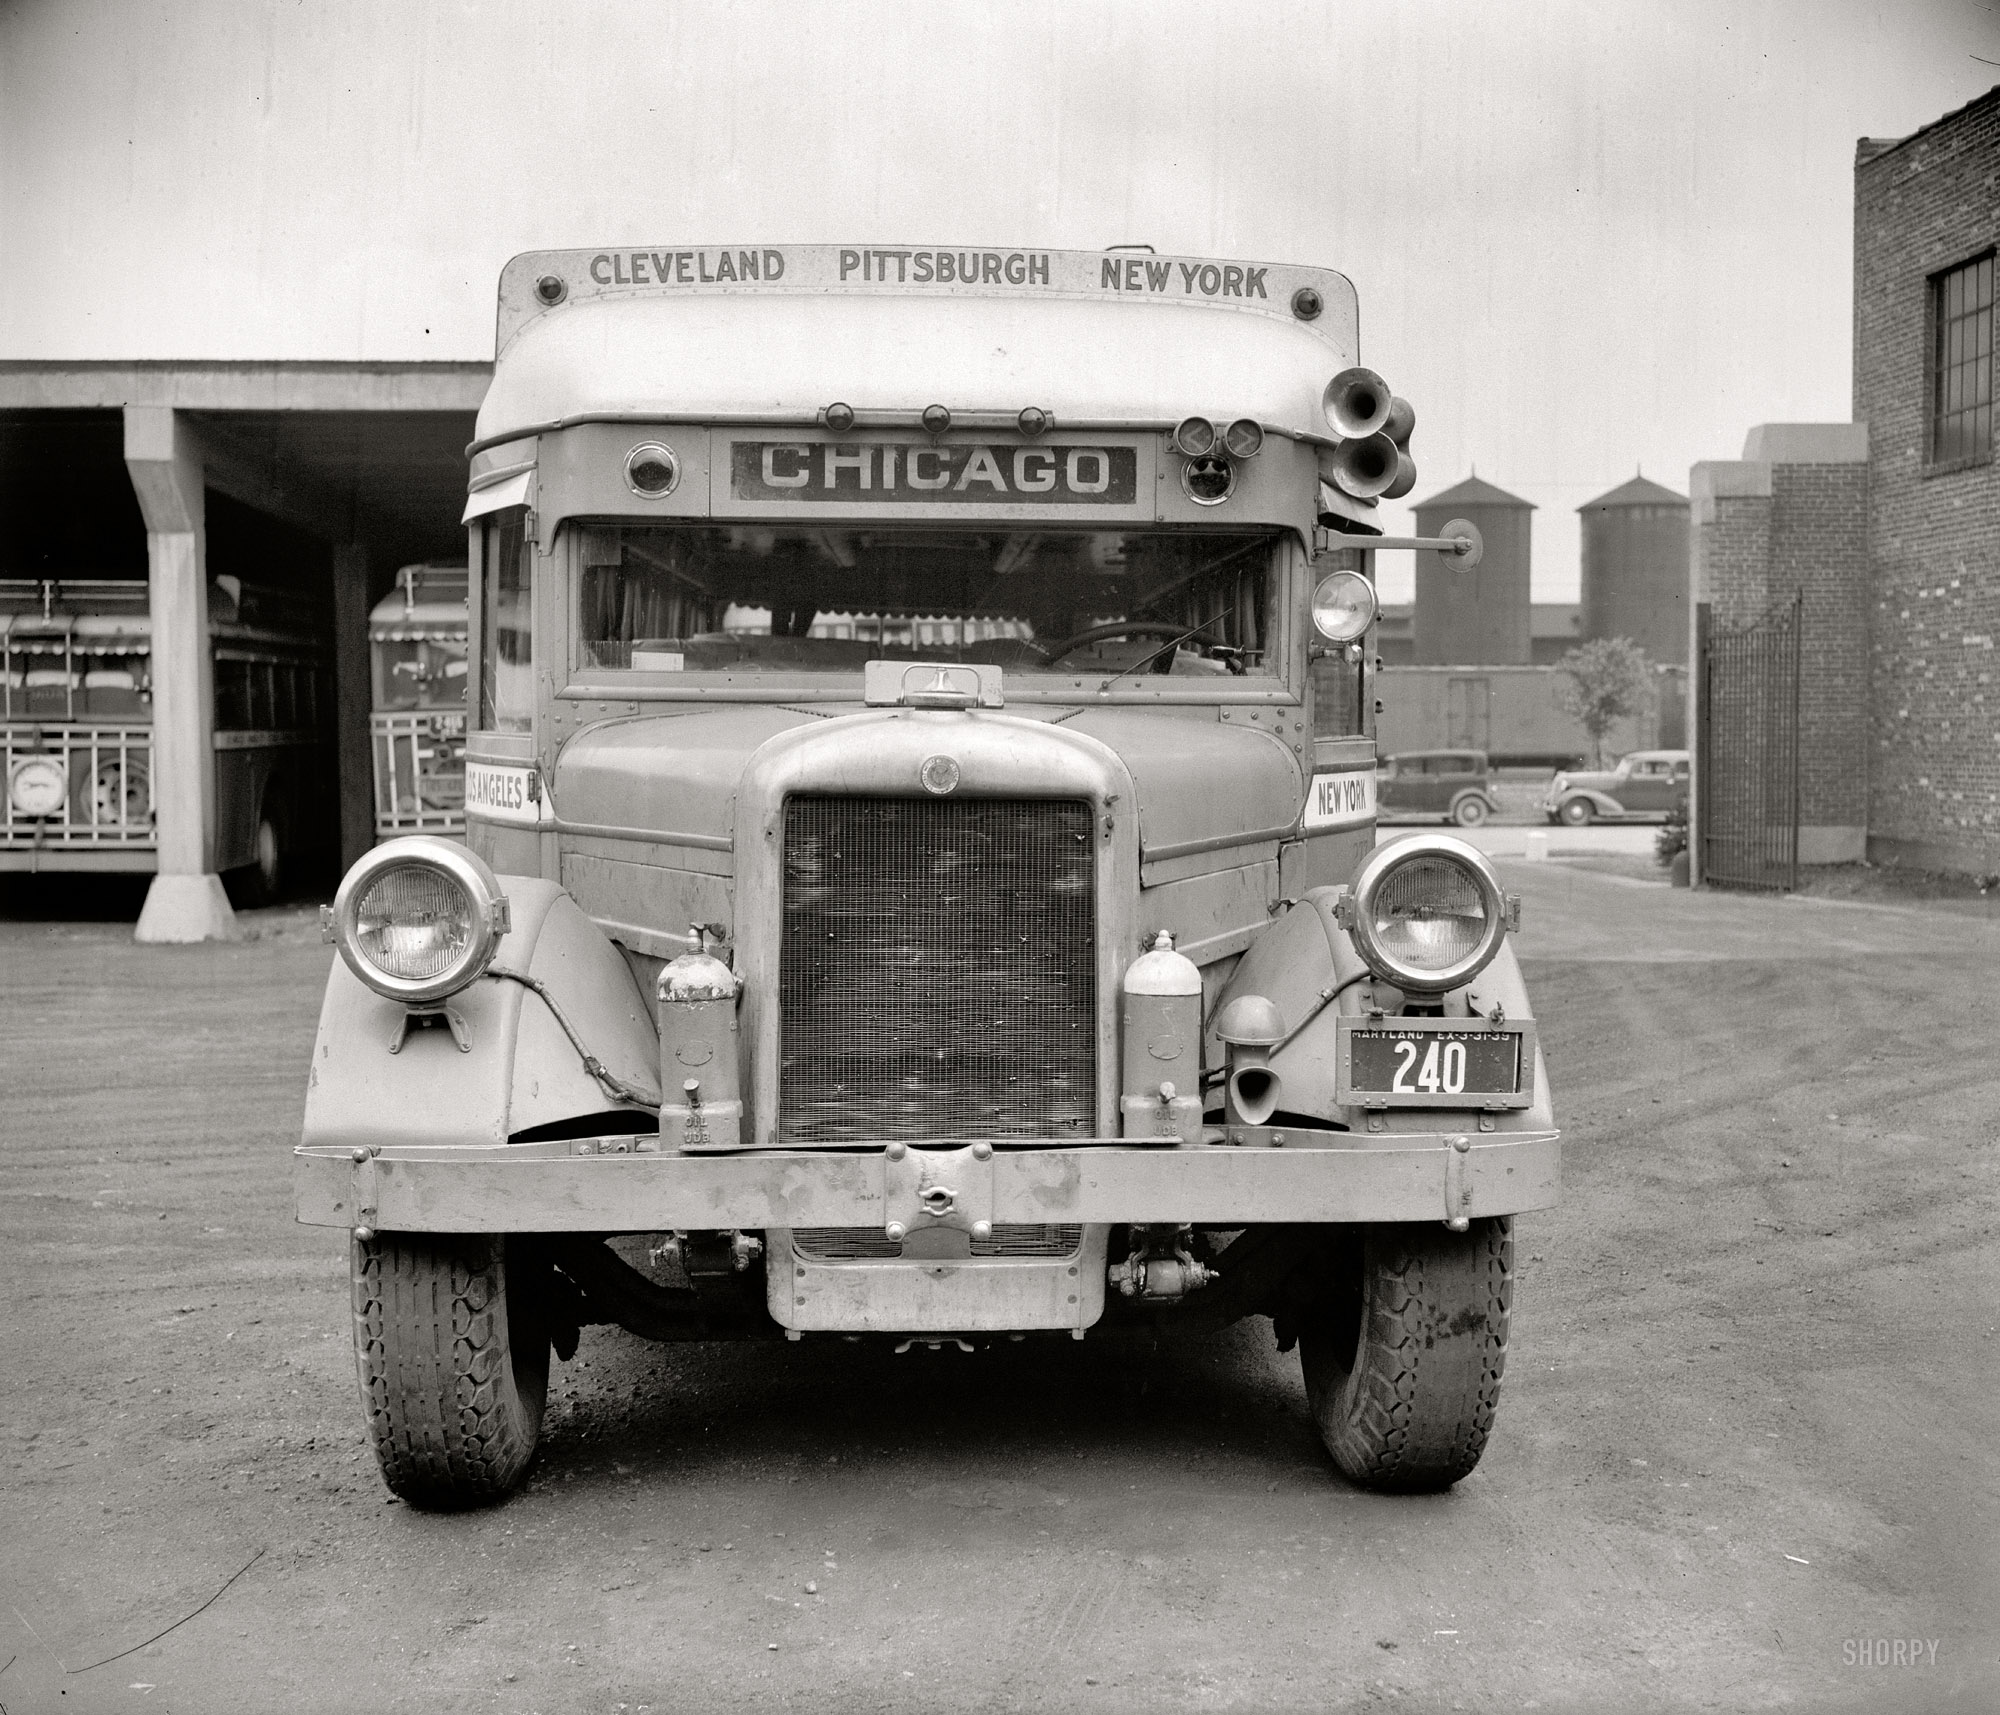 Washington, D.C., circa 1938. "Greyhound bus." This coach looks like it knows its way around. Harris & Ewing Collection glass negative. View full size.